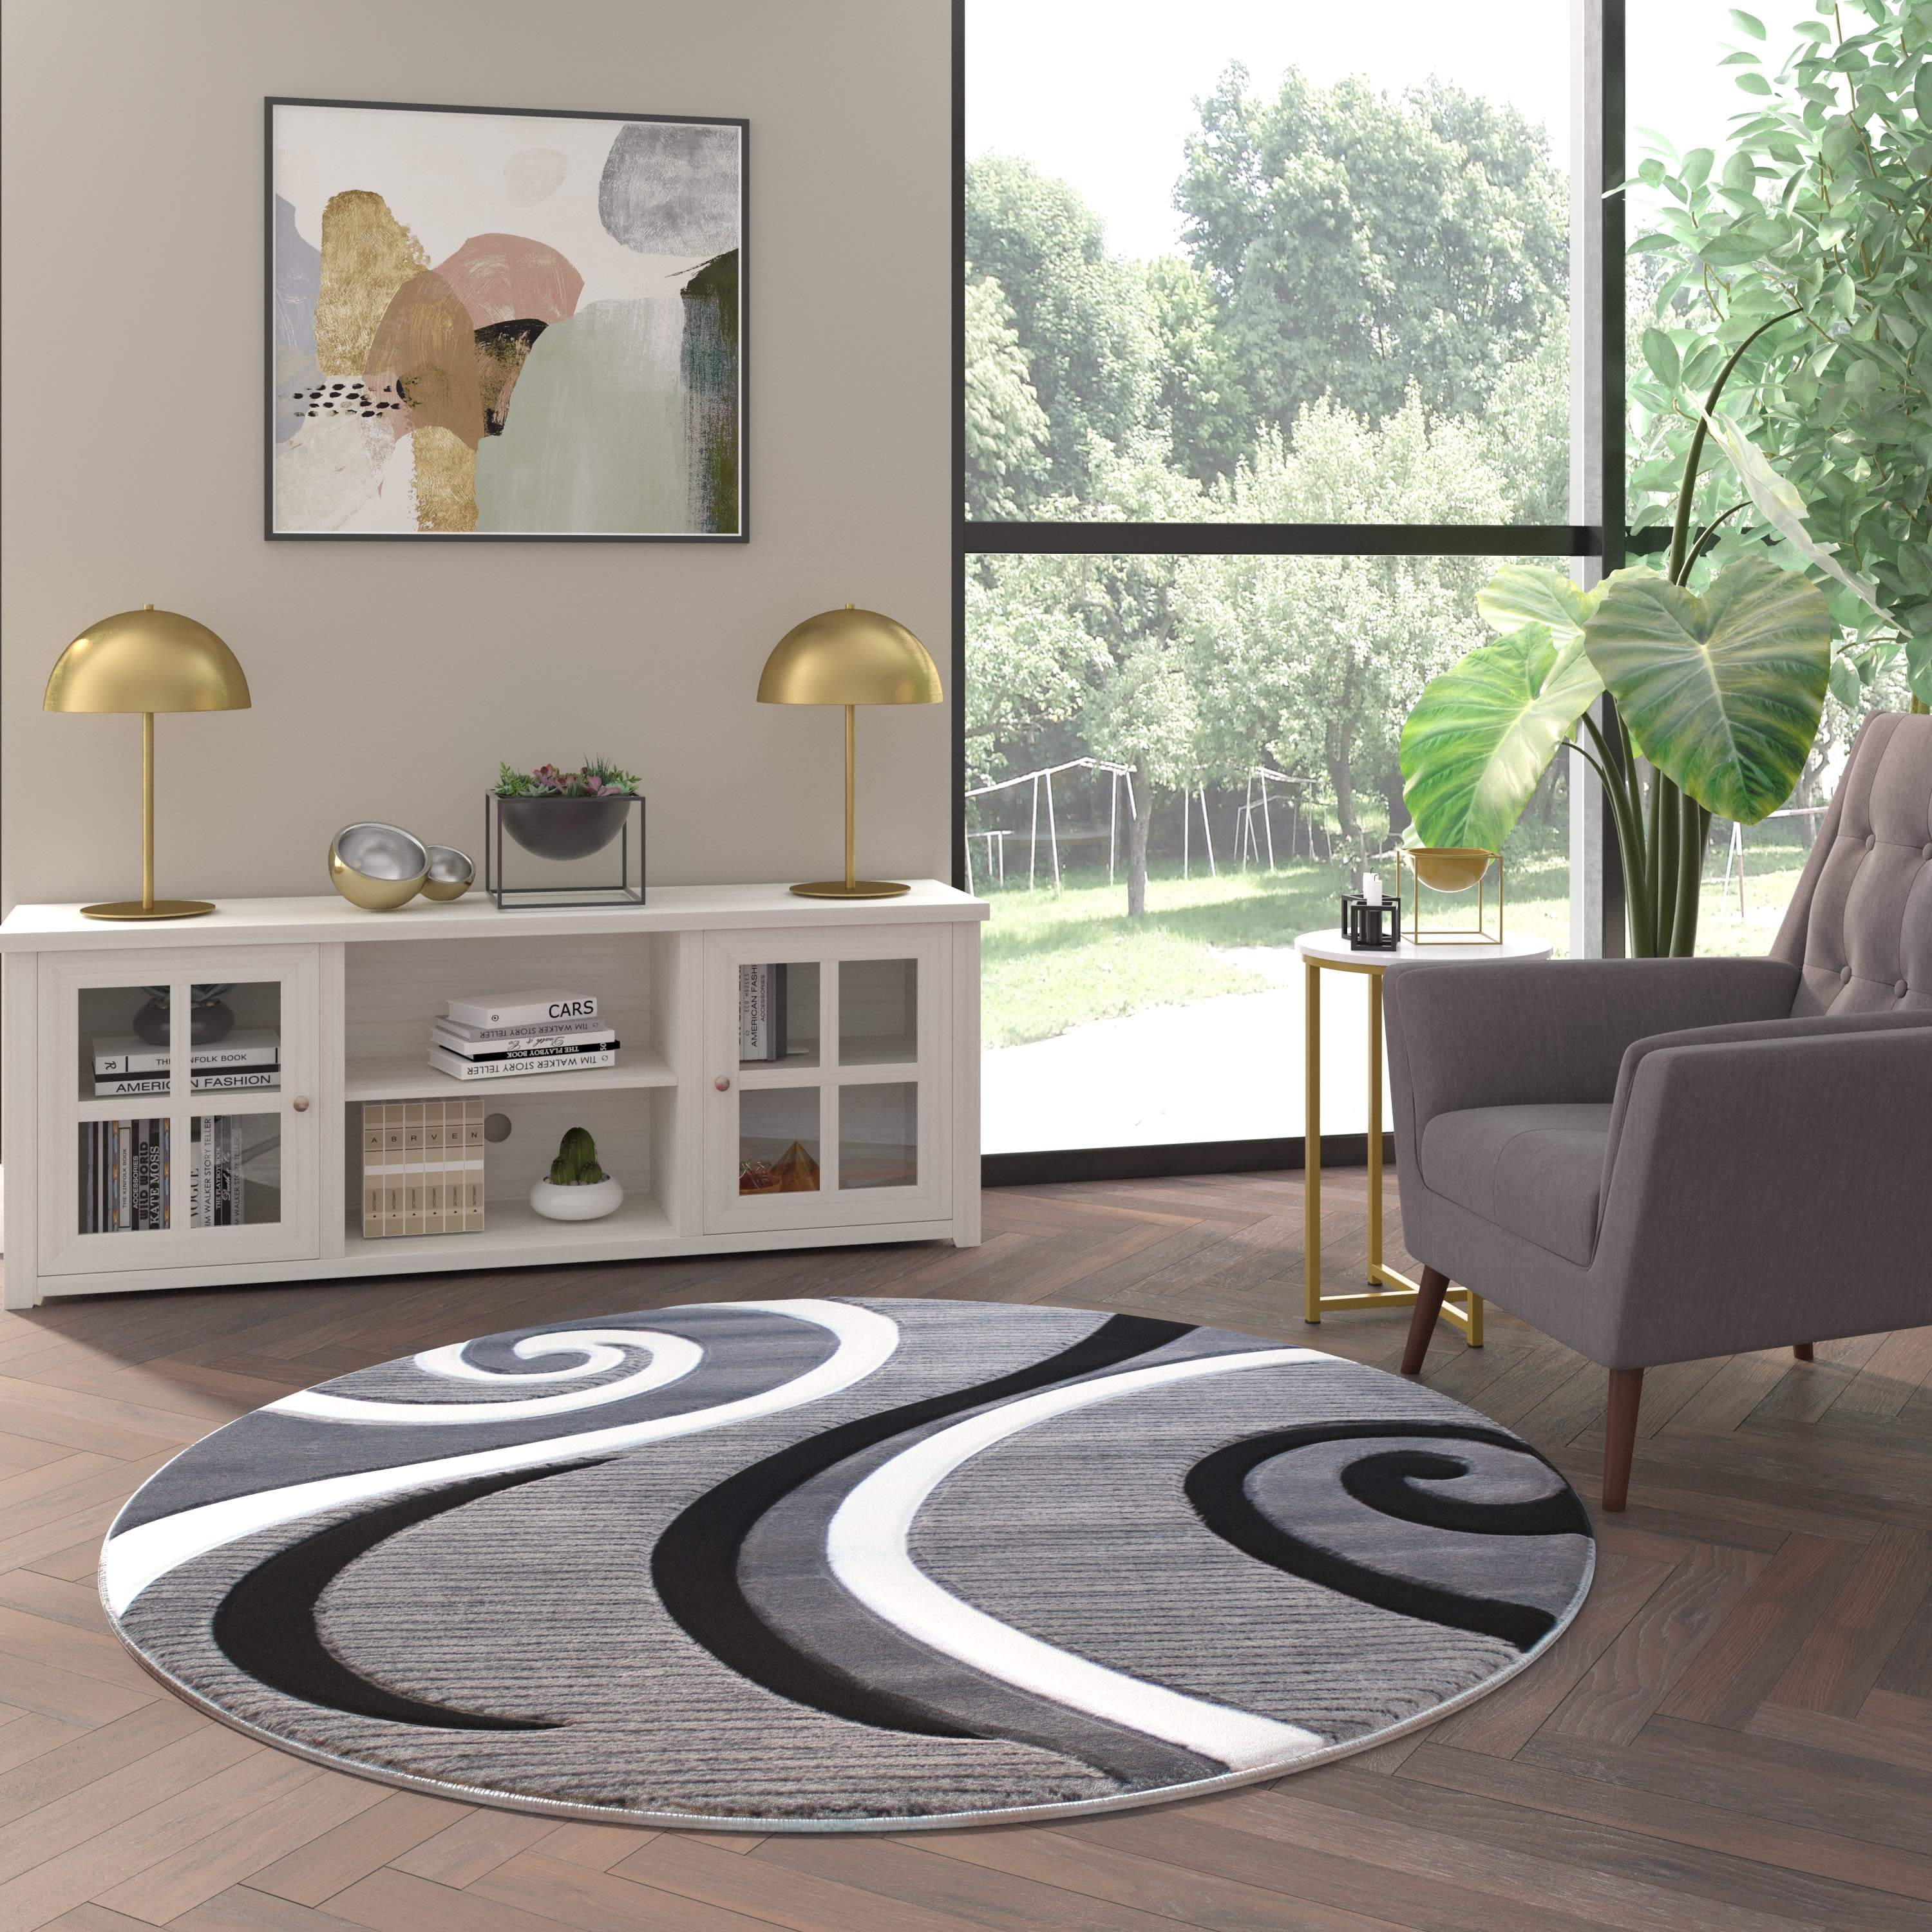 Emma + Oliver 5x5 Round Accent Rug with Modern 3D Sculpted Swirl